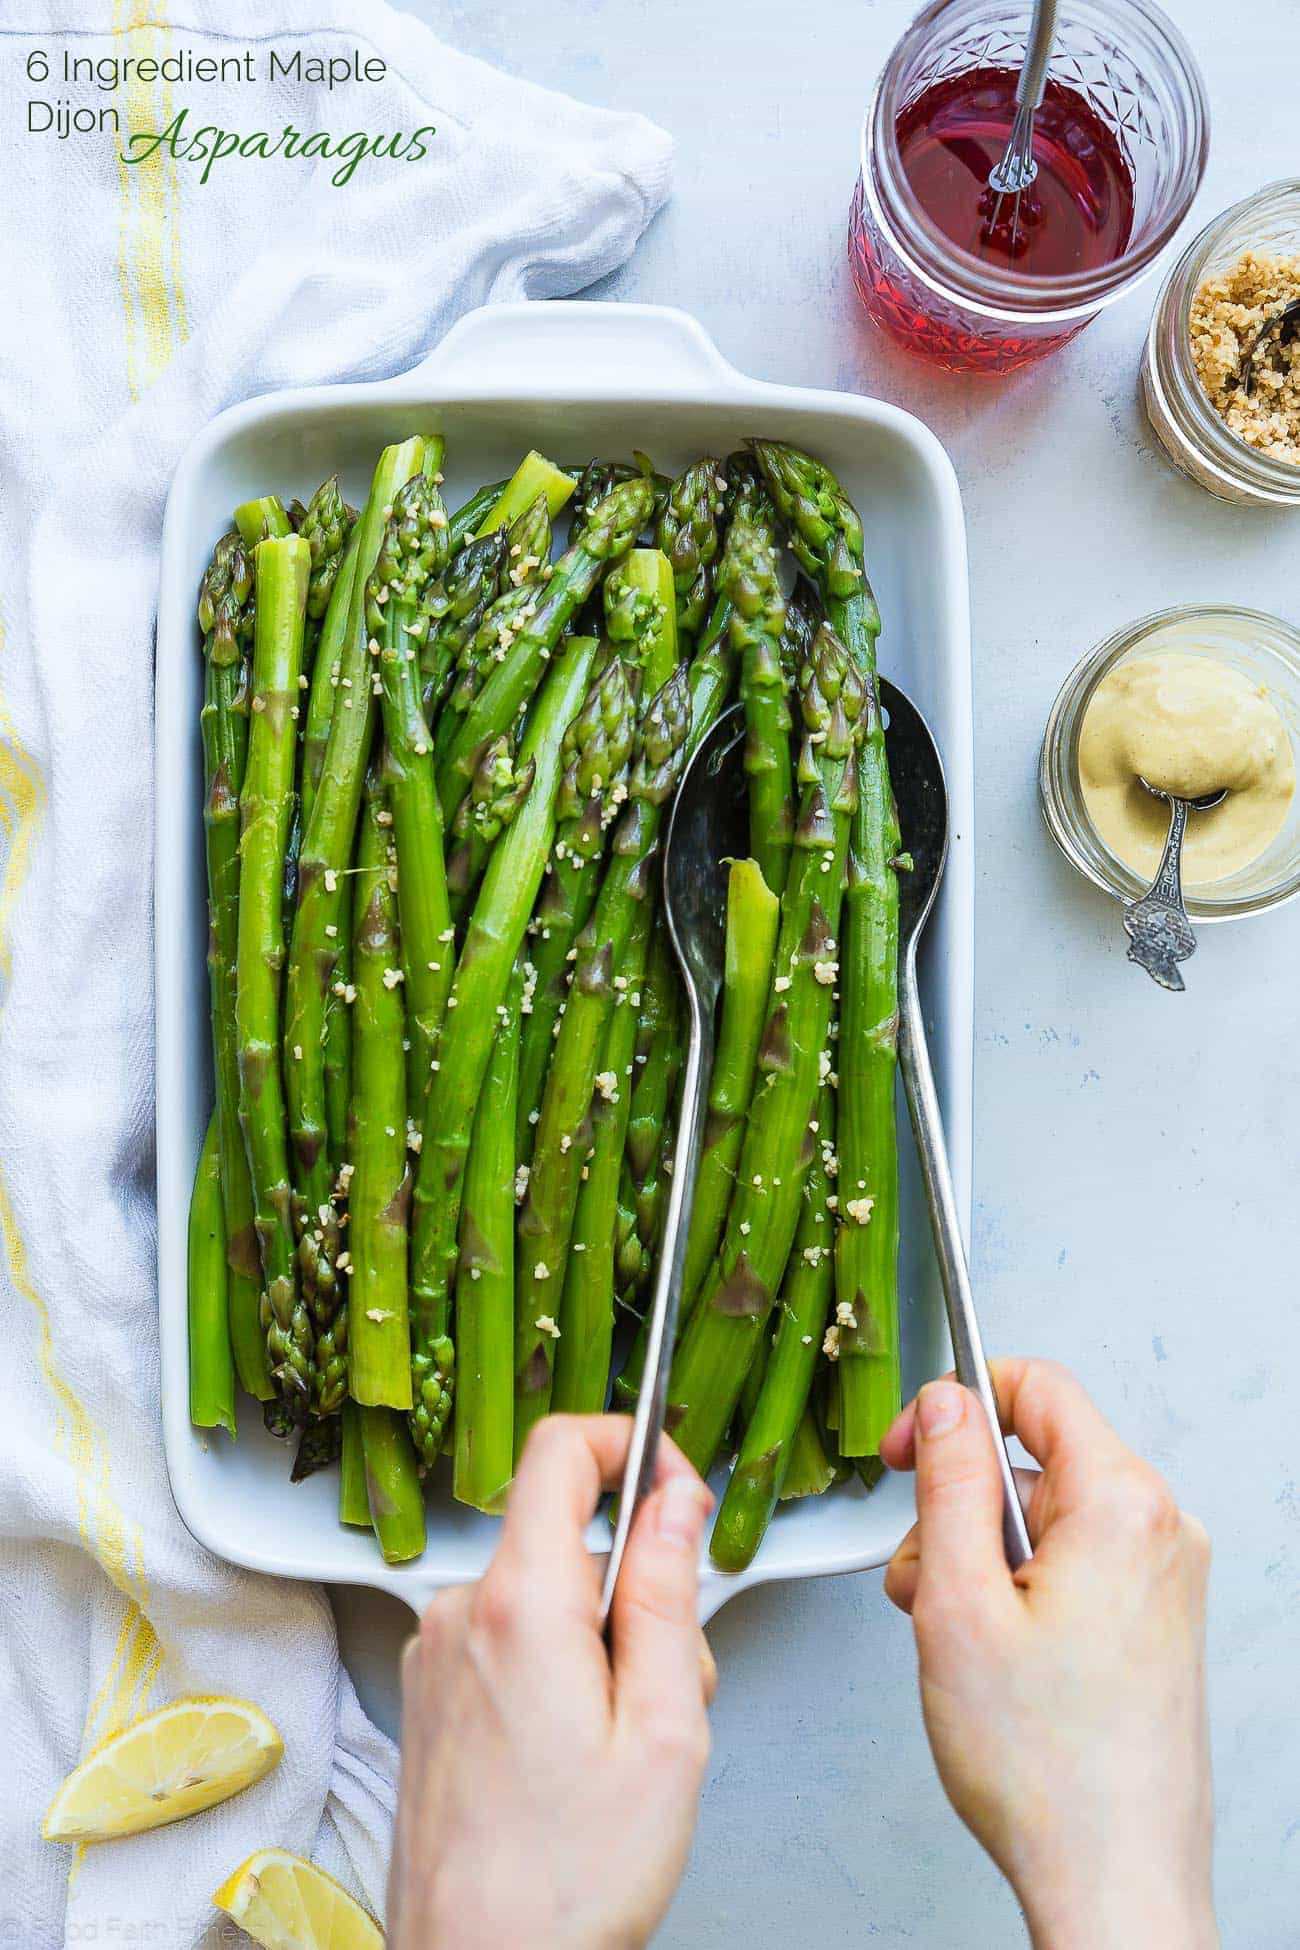 Photograph of hands serving blanched asparagus. Recipe on foodfaithfitness.com